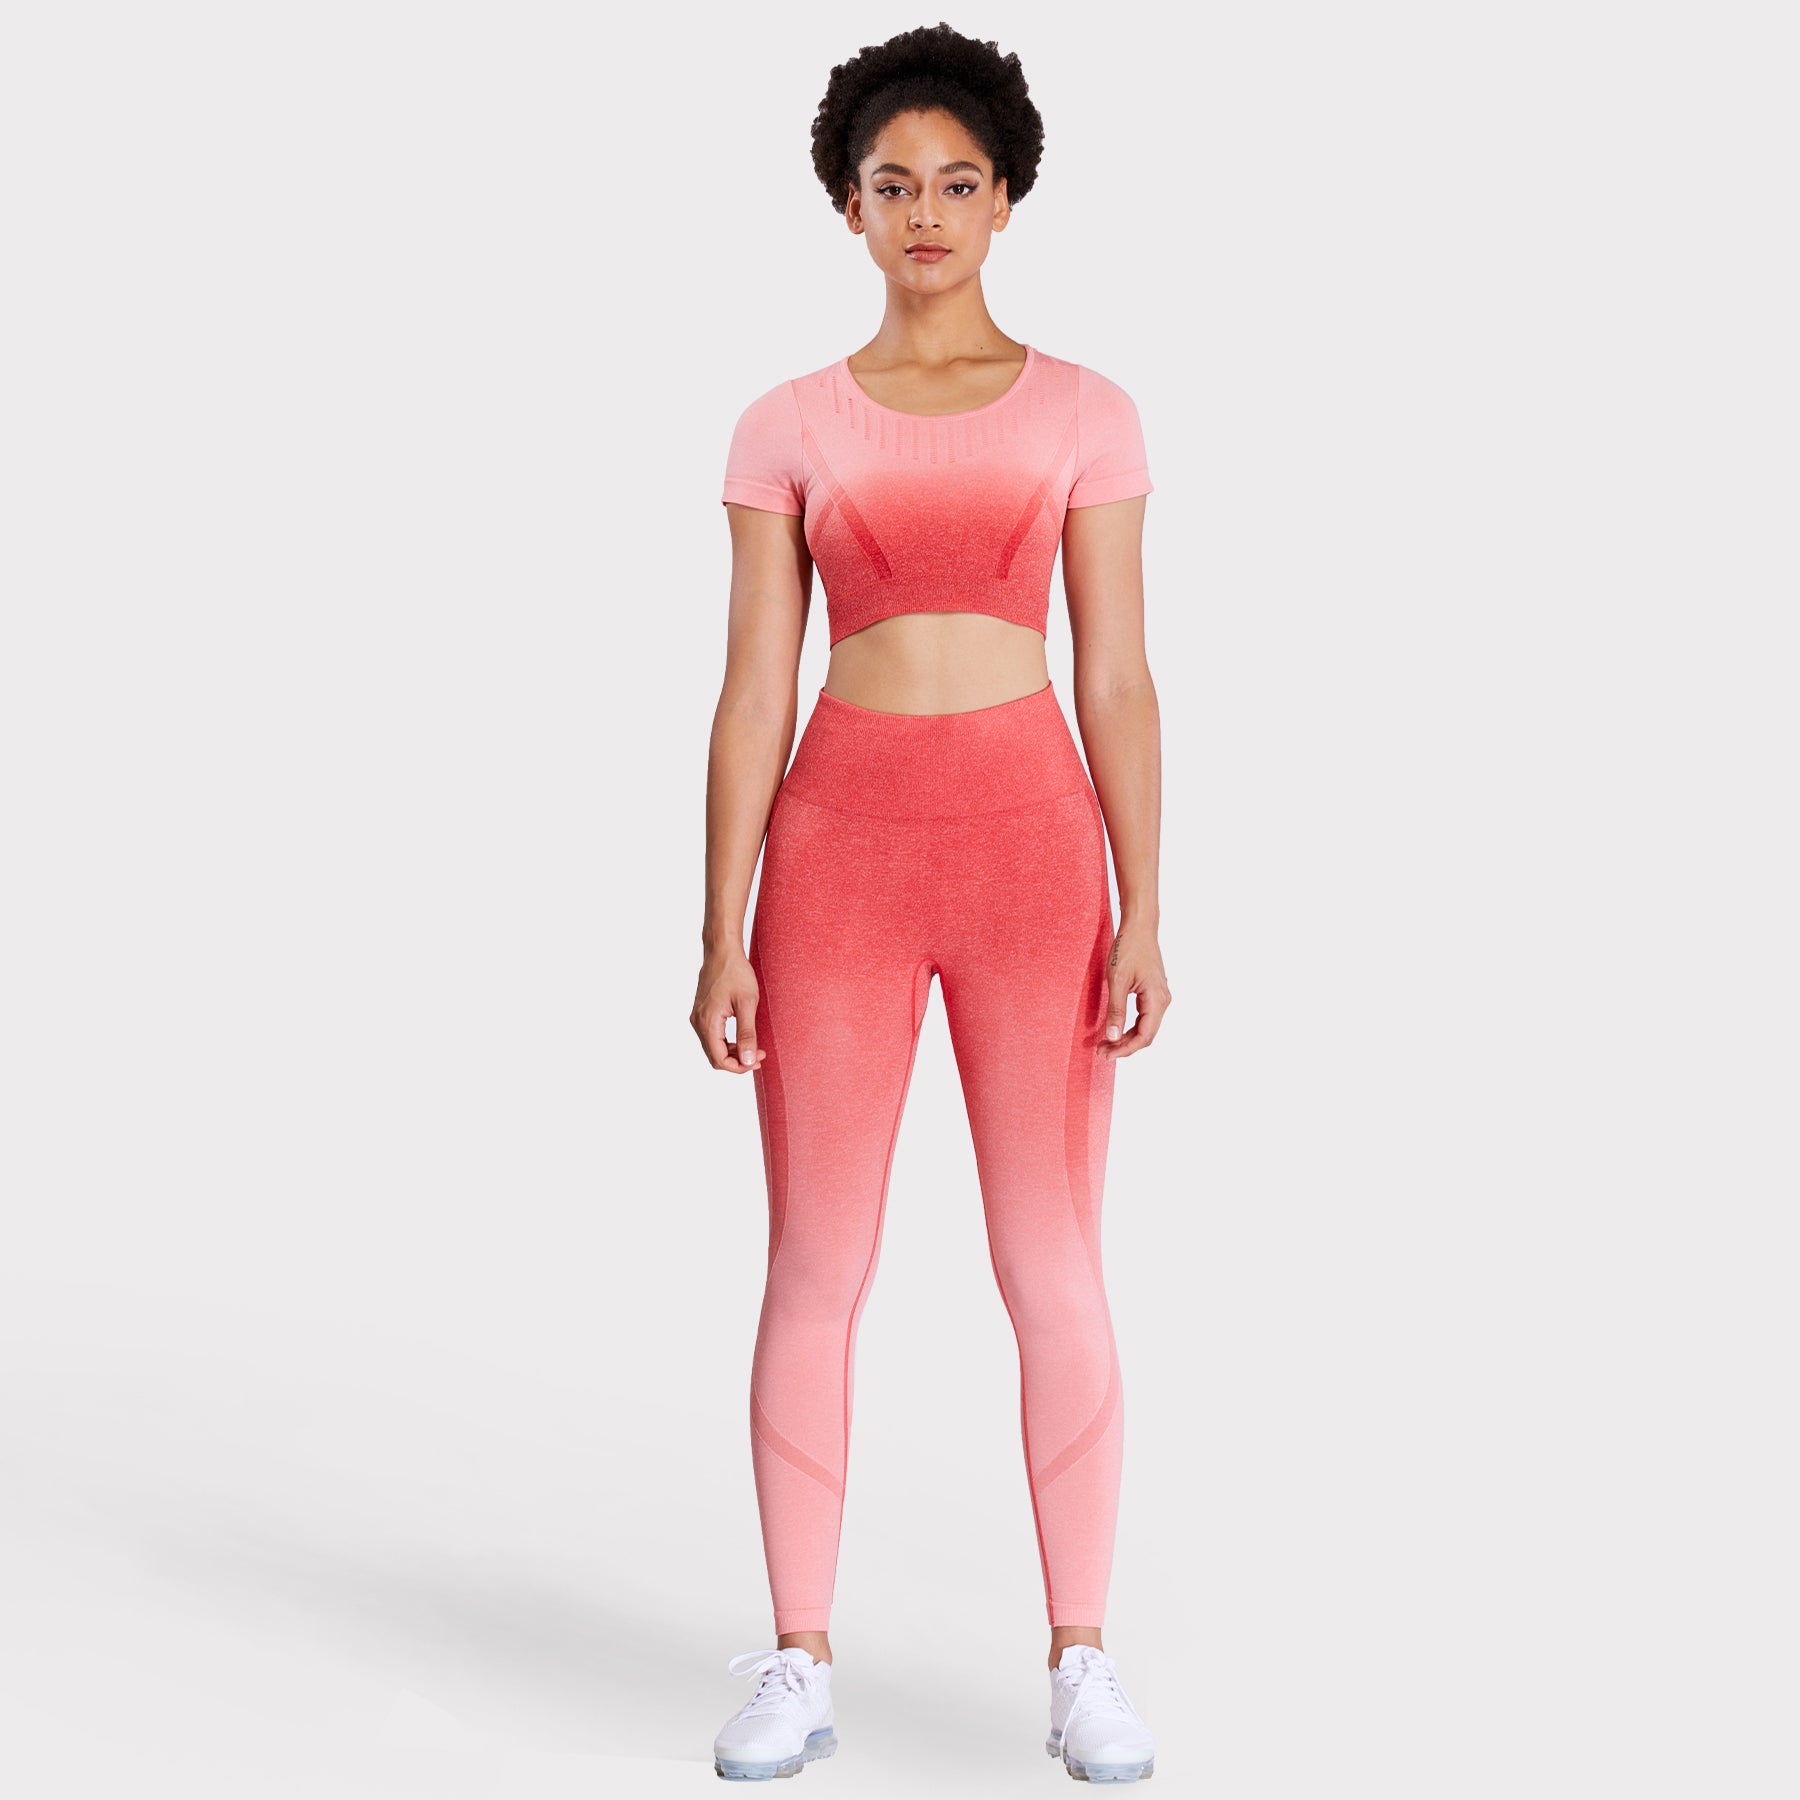 Missguided Pink Ombre High Waist Seamless Gym Leggings Size 10